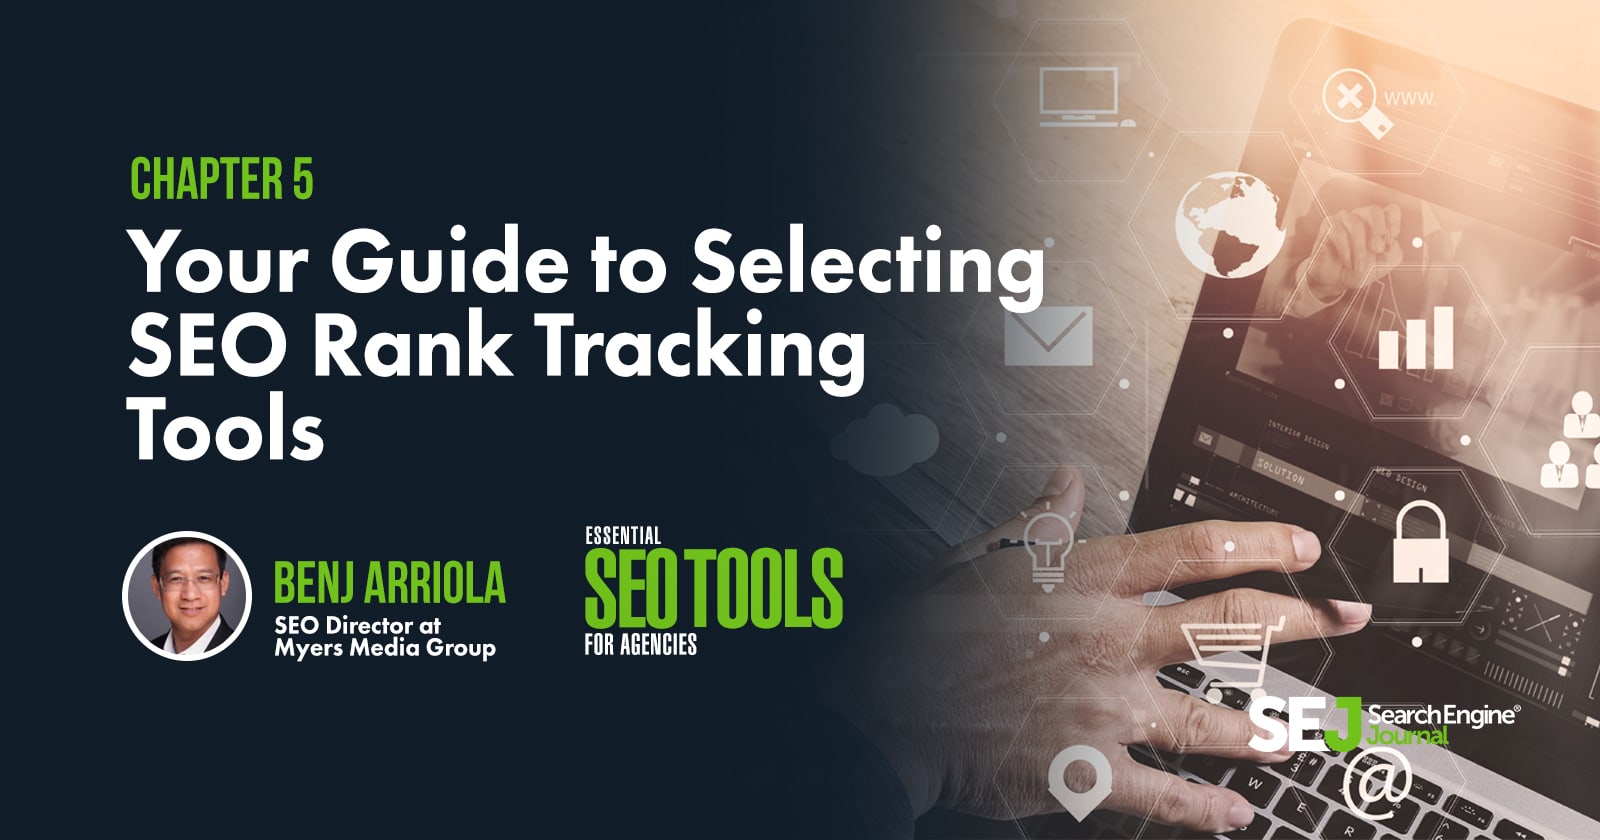 Guide-to-Selecting-SEO-Rank-Tracking-Tools.jpg